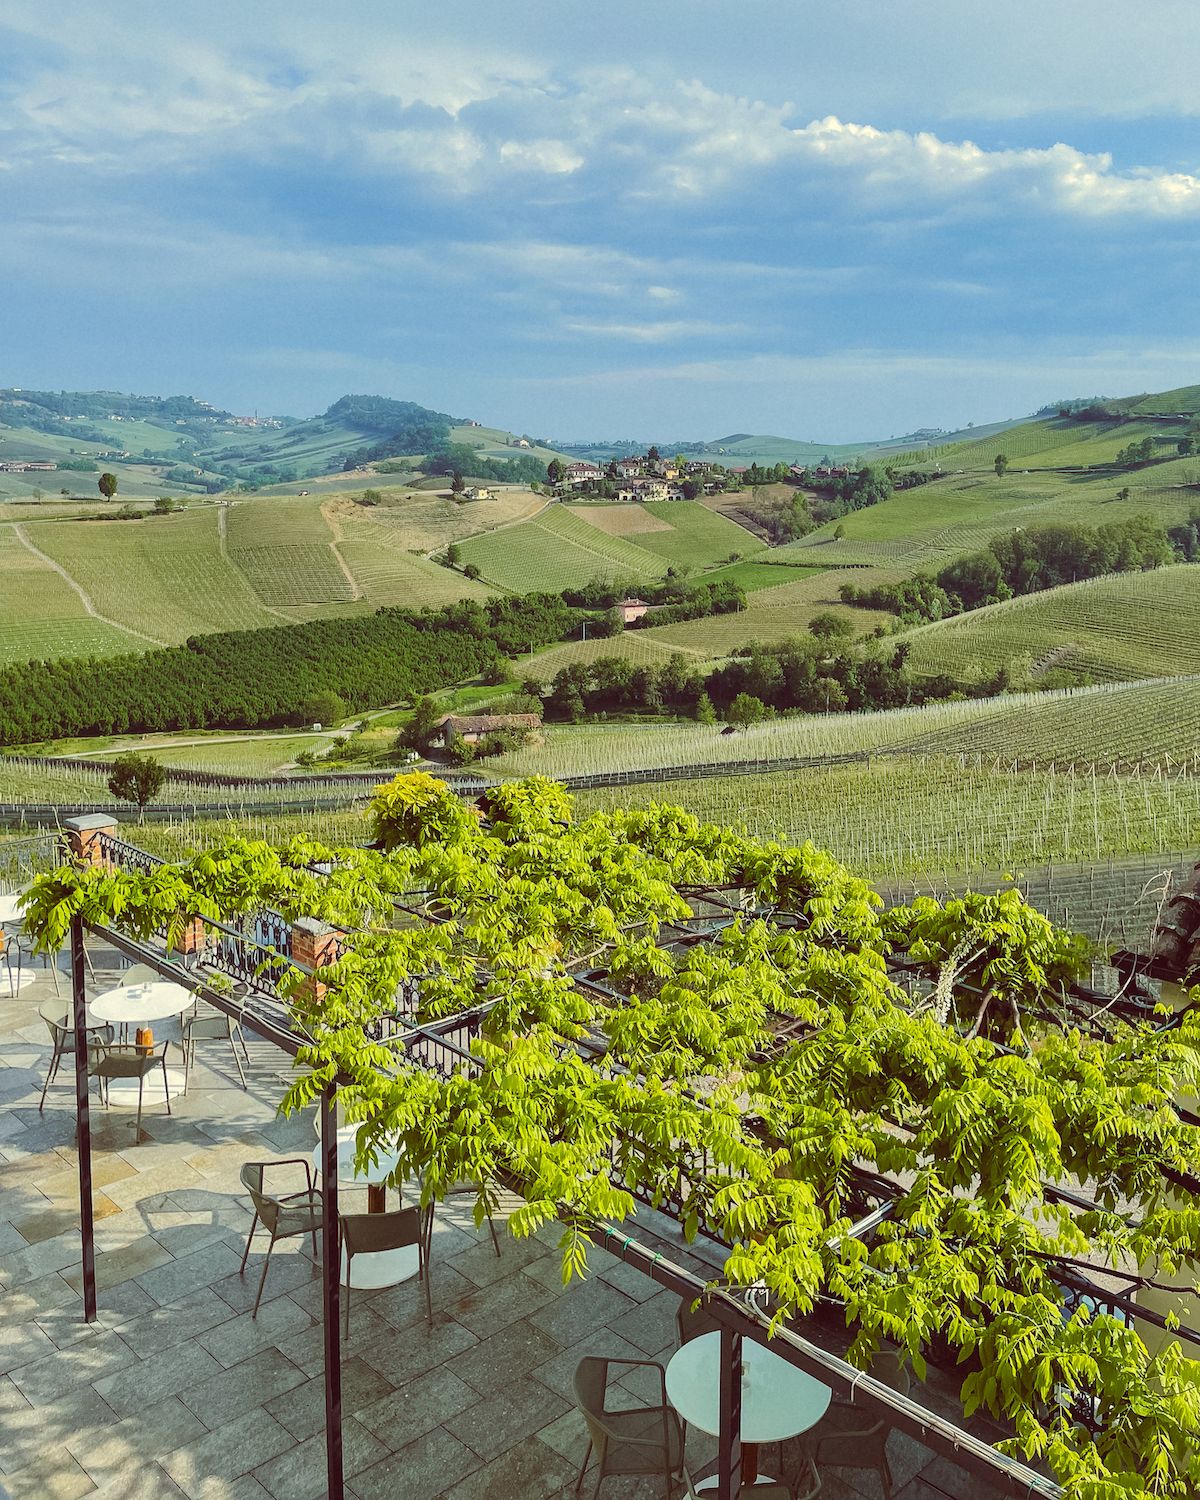 Round tables and chairs outside overlooking Barolo vineyards at Palas Cerequio hotel